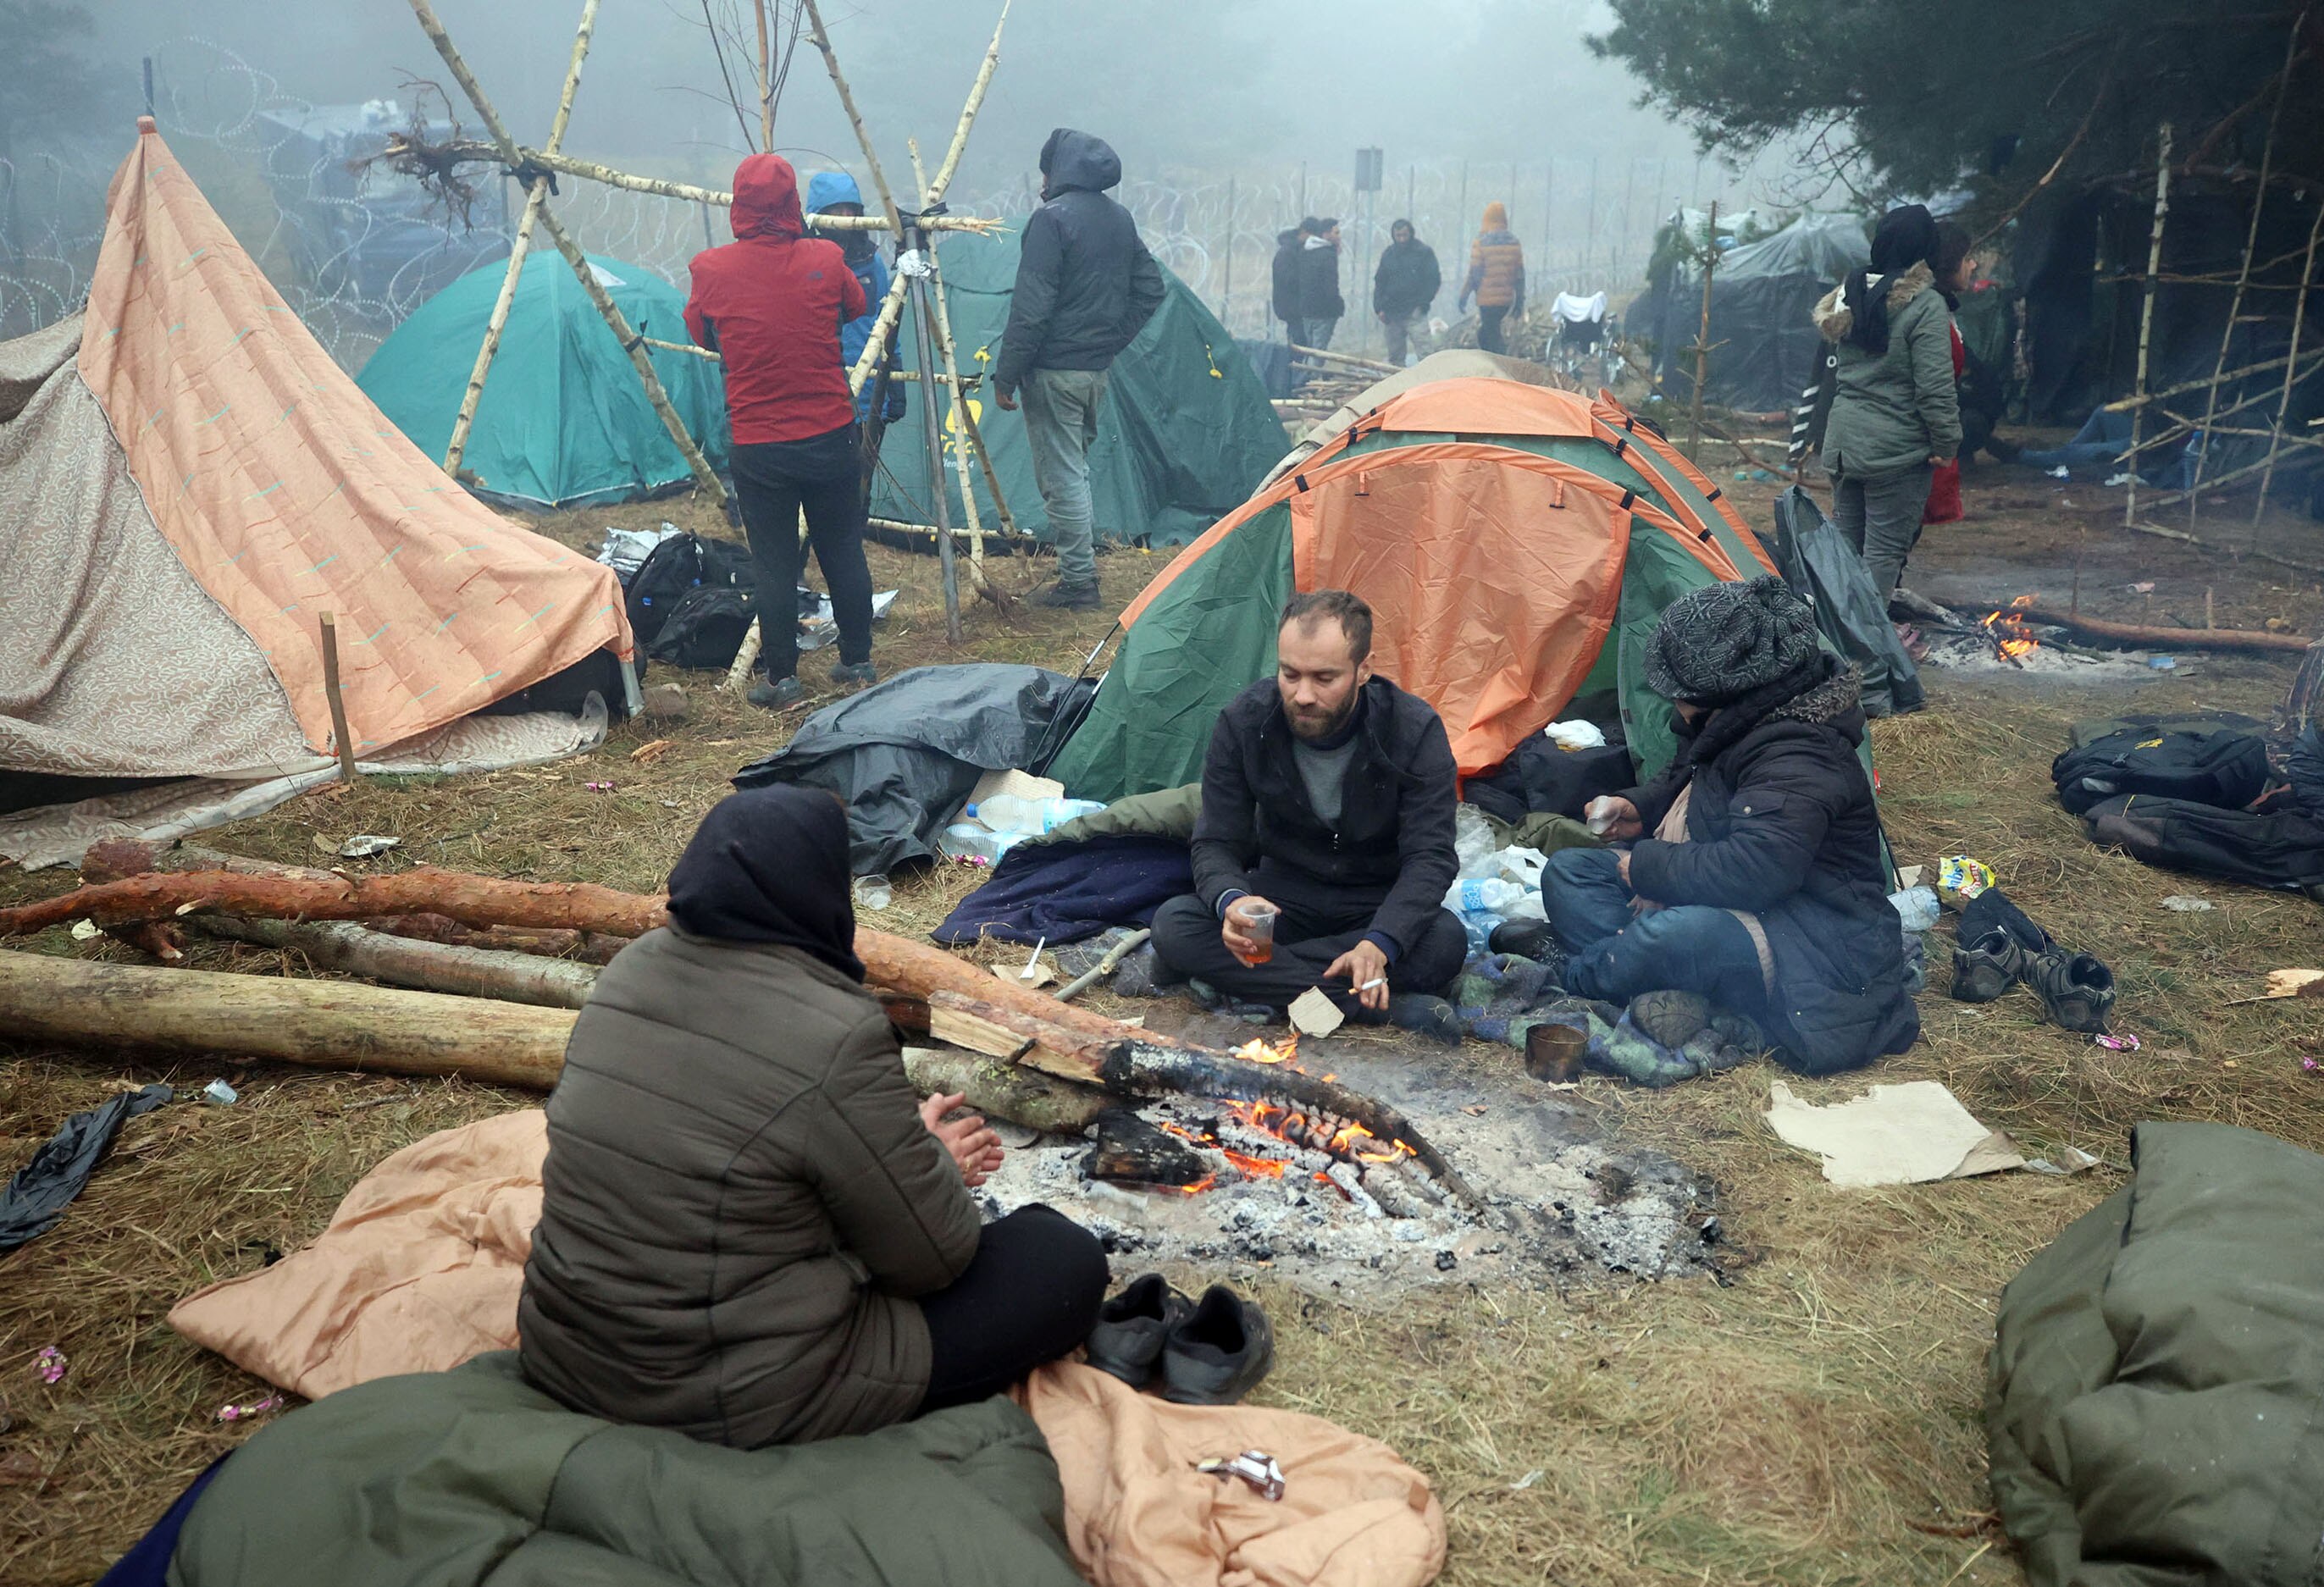 Migrants in a tent camp on the Belarusian-Polish border on November 11, 2021.